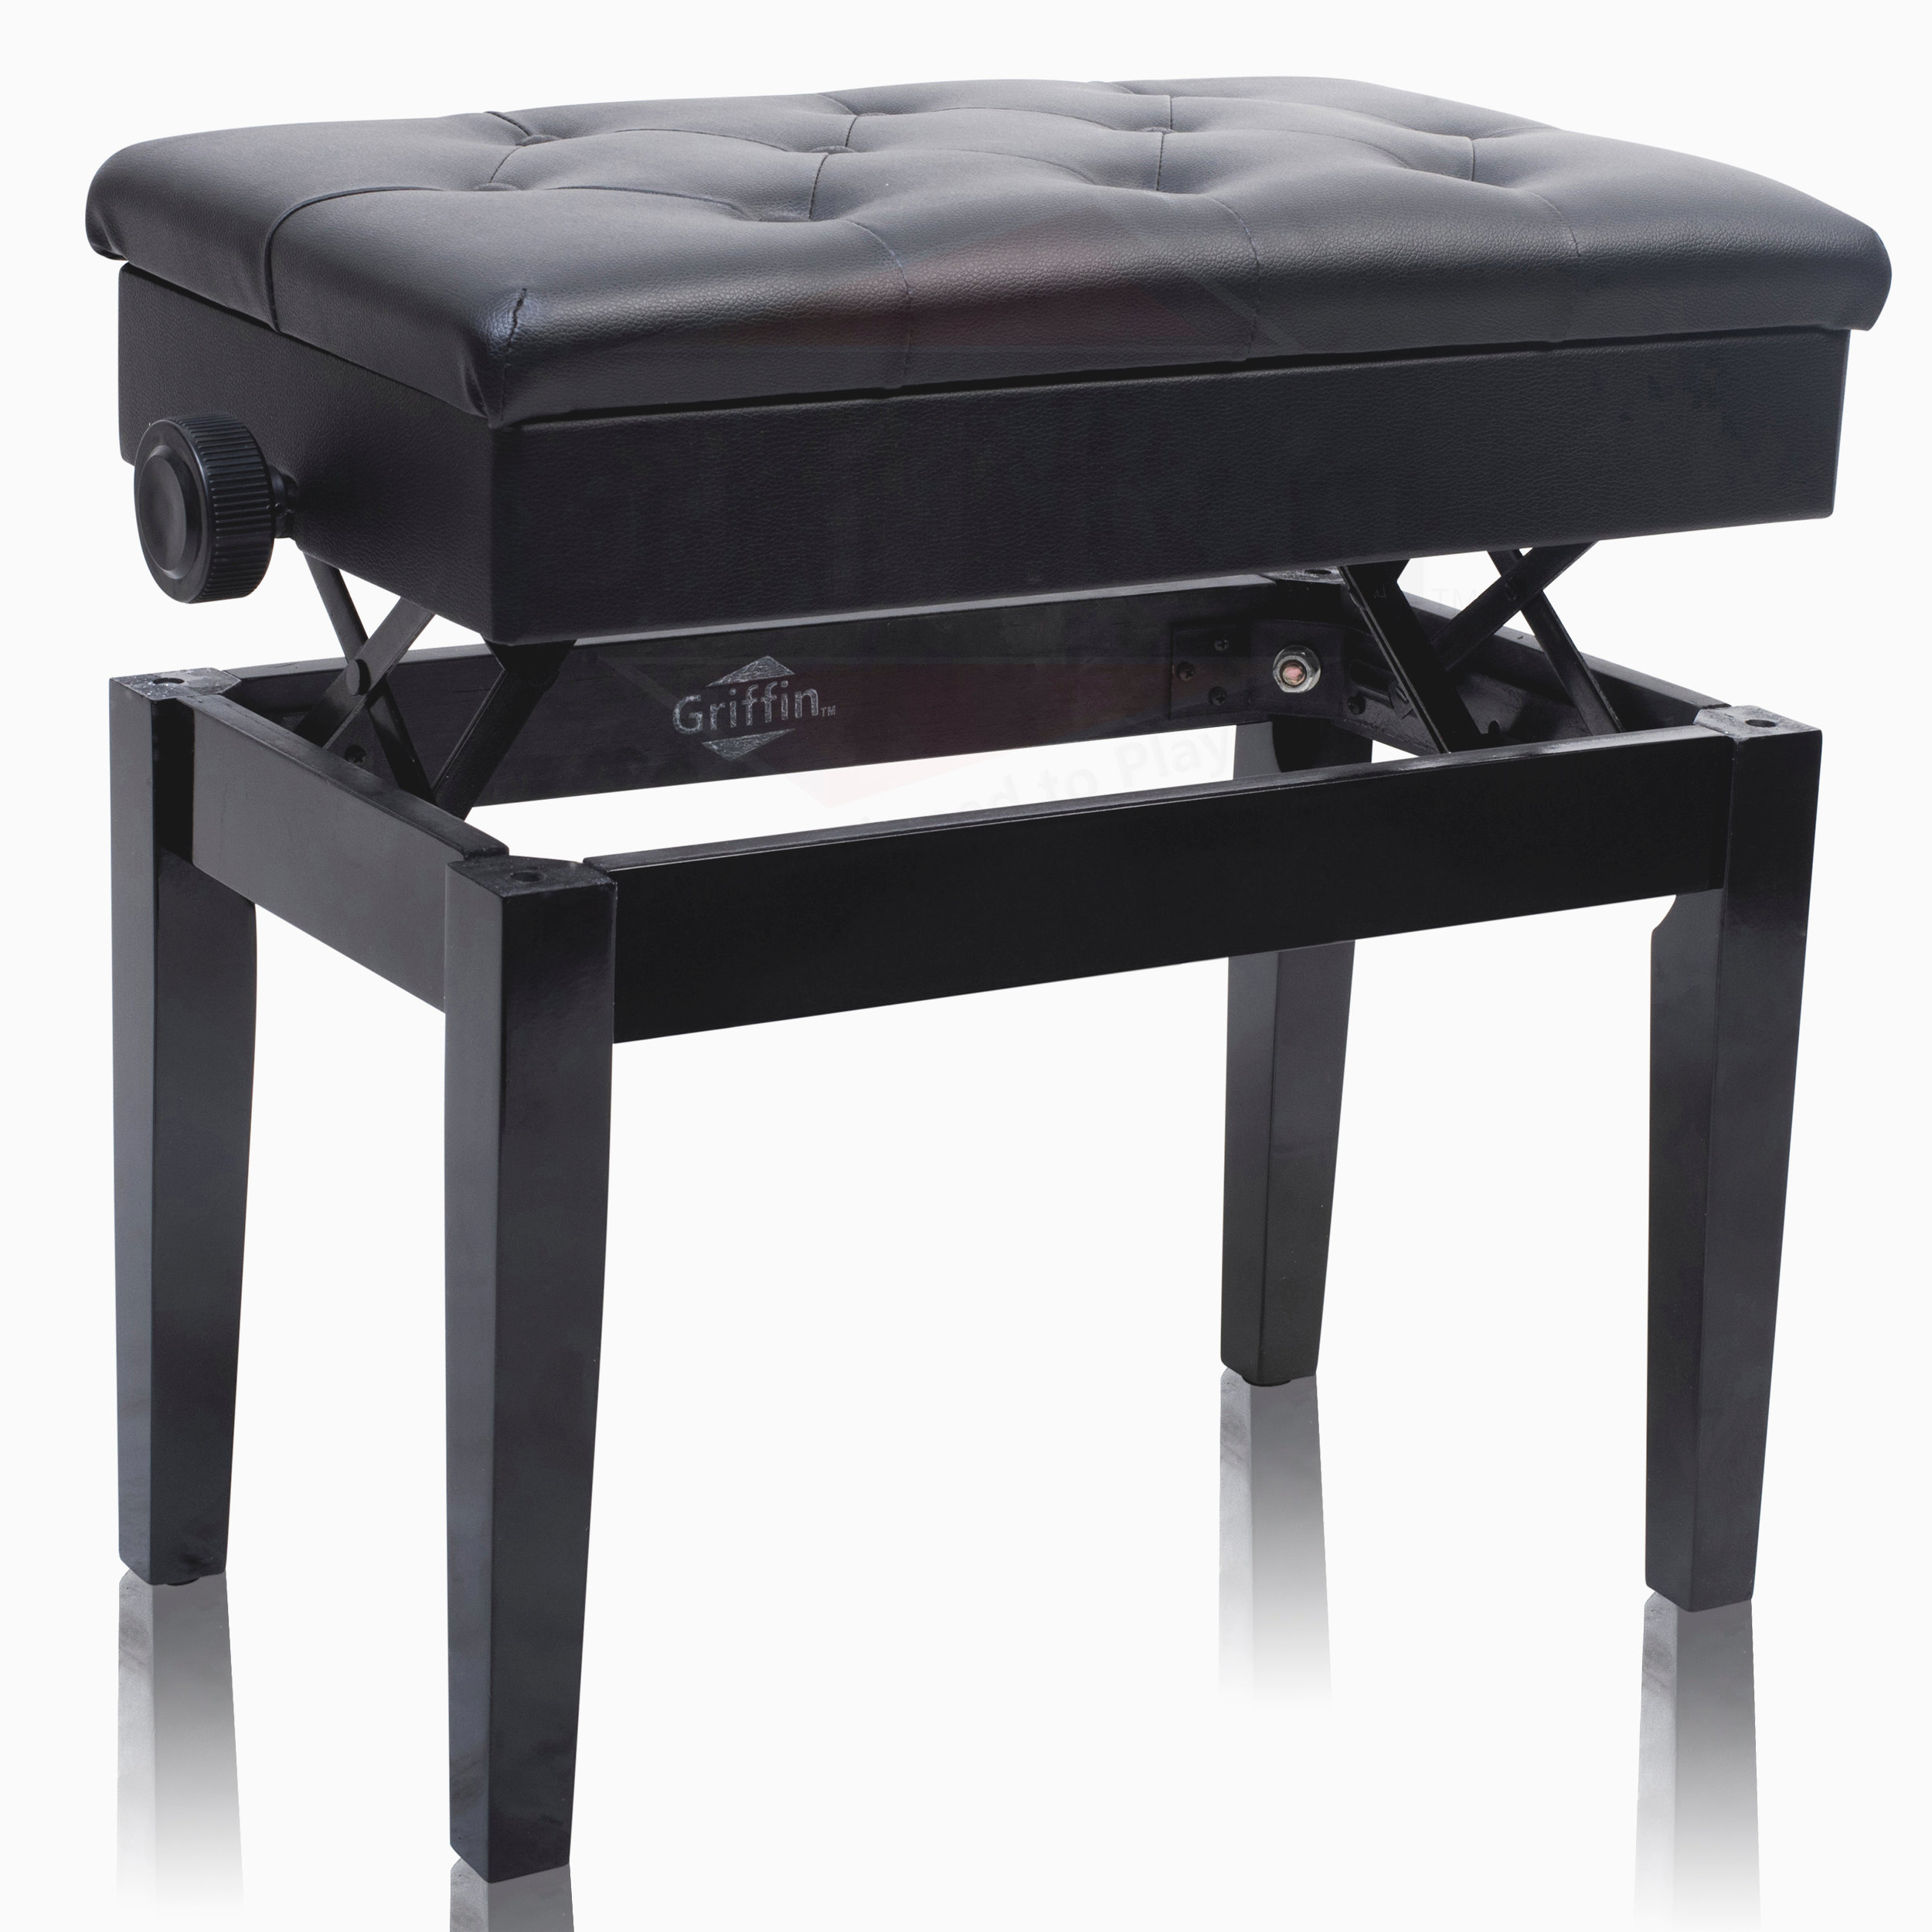 GRIFFIN Black Leather Piano Bench - Wood Vanity Stool